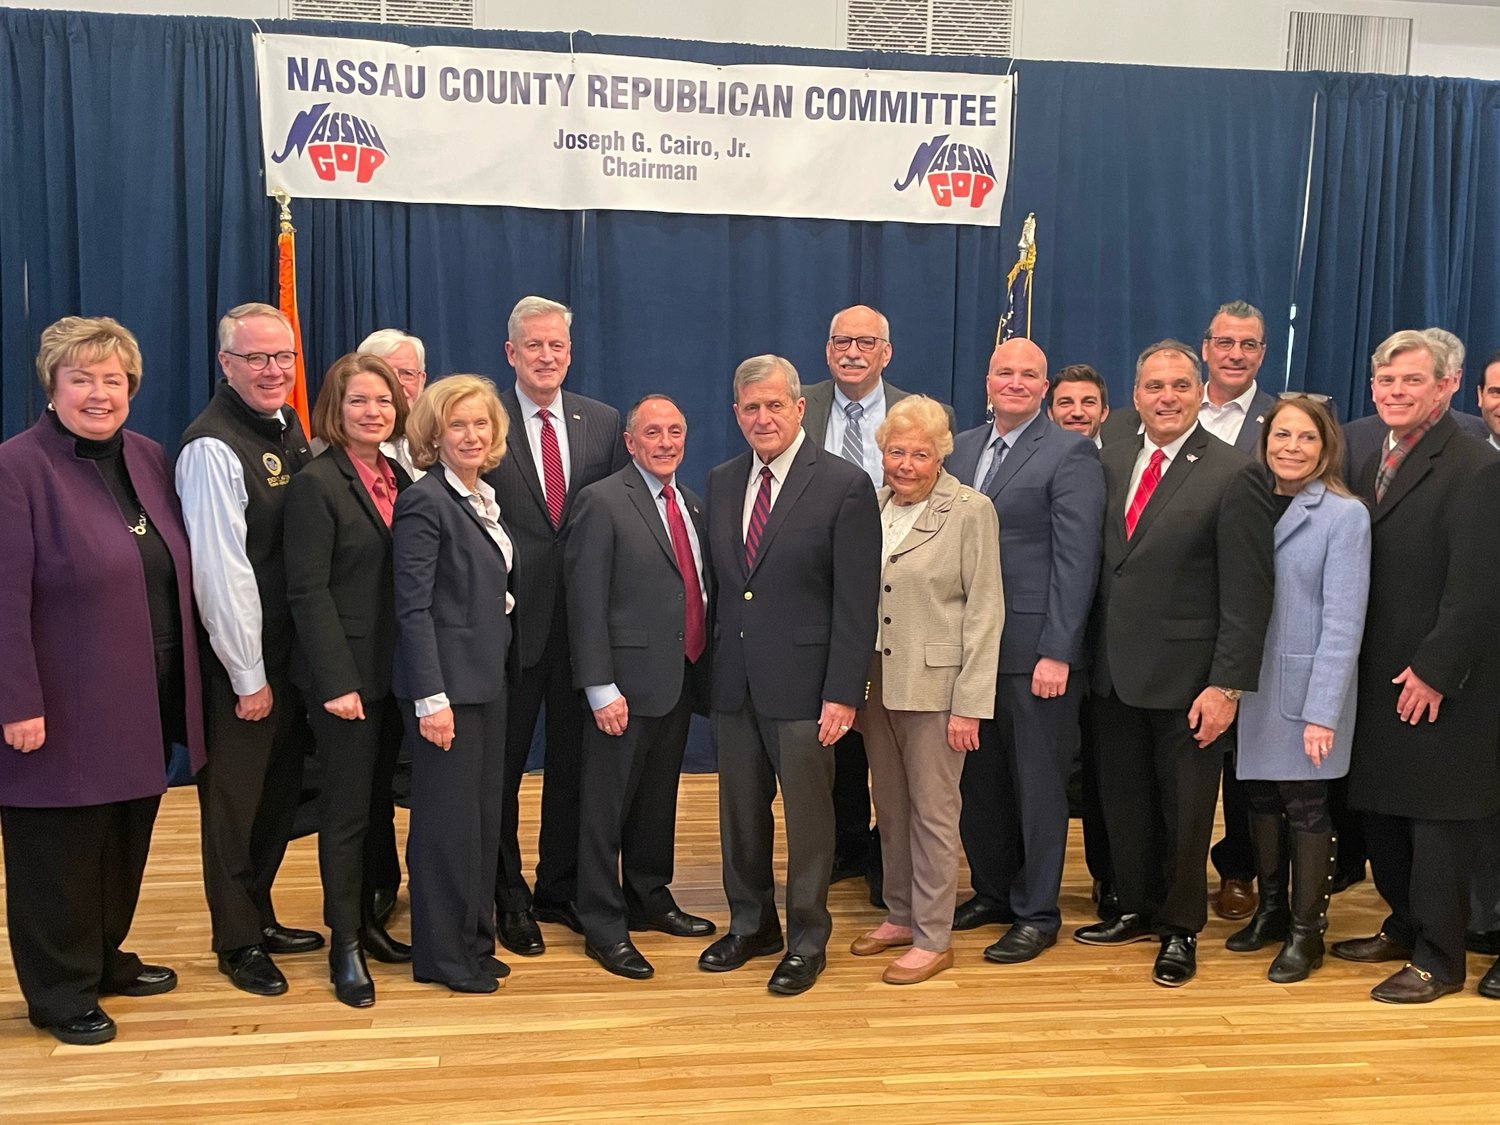 Michael Giangregorio, seventh from left, was elected to succeed State Sen. Steve Rhoads in the Nassau County Legislature’s 19th District in a special election on Feb. 28. He defeated Democrat Rob Miles, and will assume office as soon as the vote is certified.